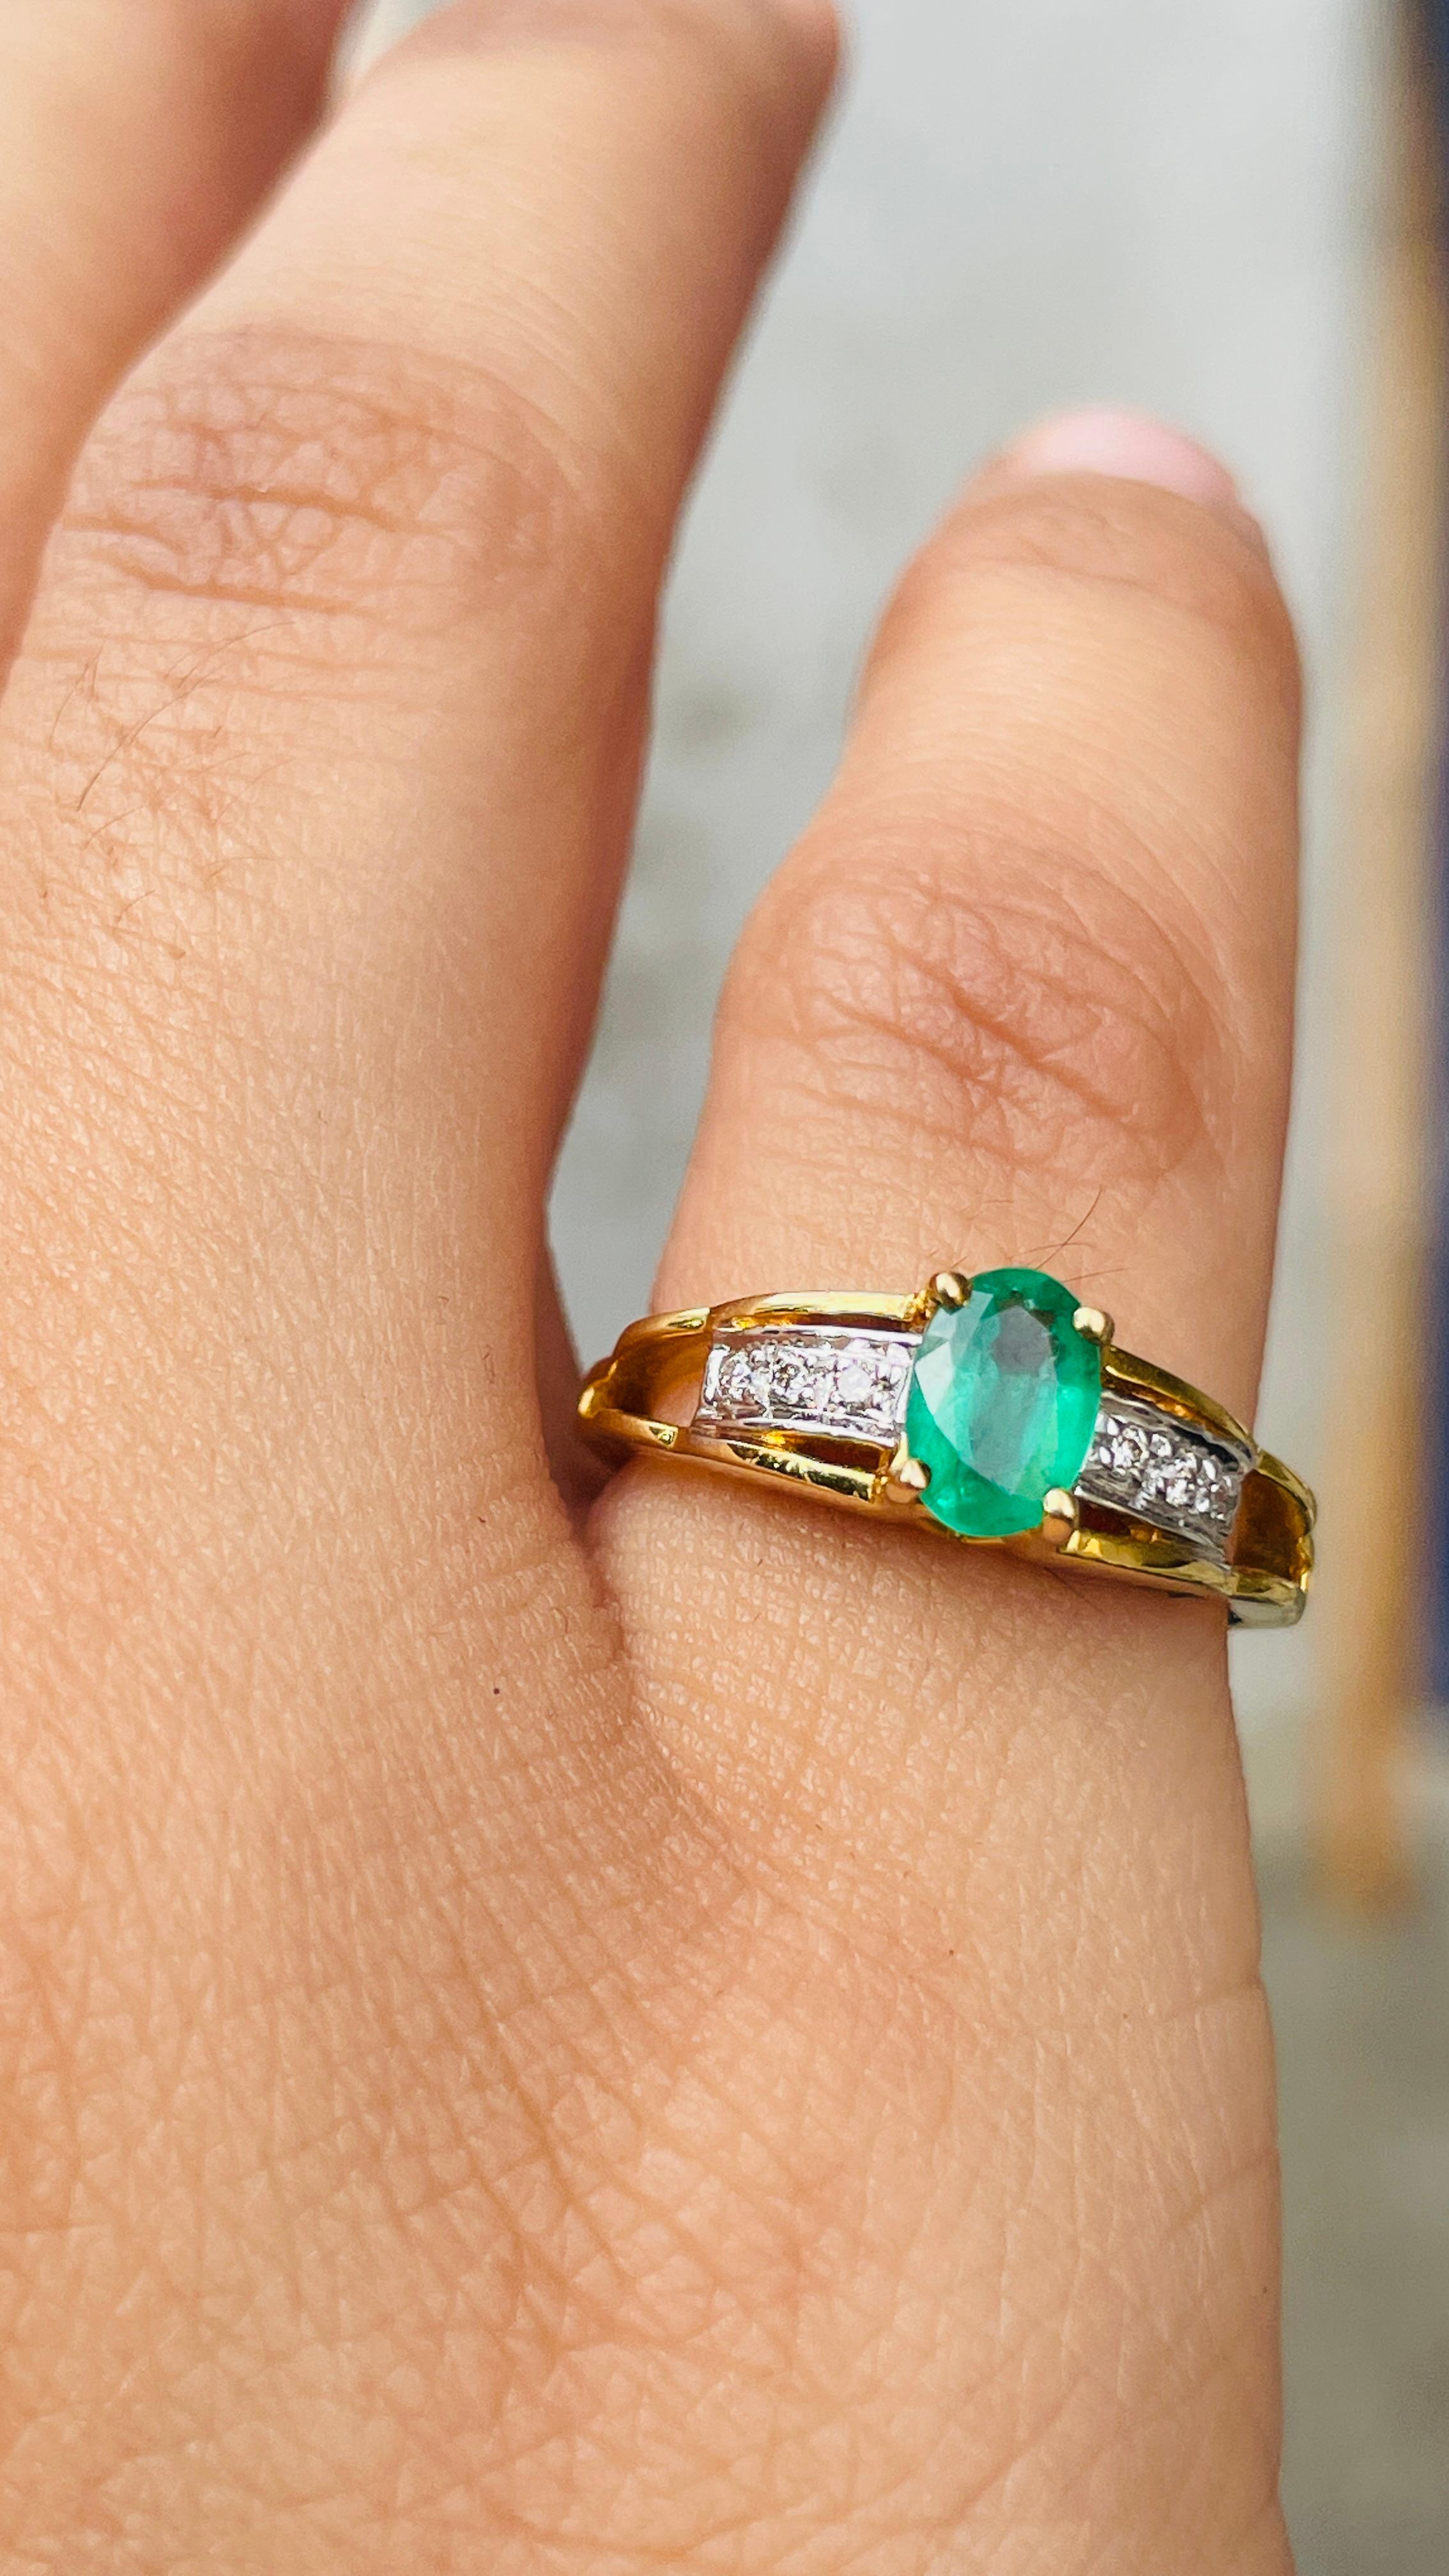 For Sale:  18K Yellow Gold Oval Shaped Emerald Ring with Diamonds 2